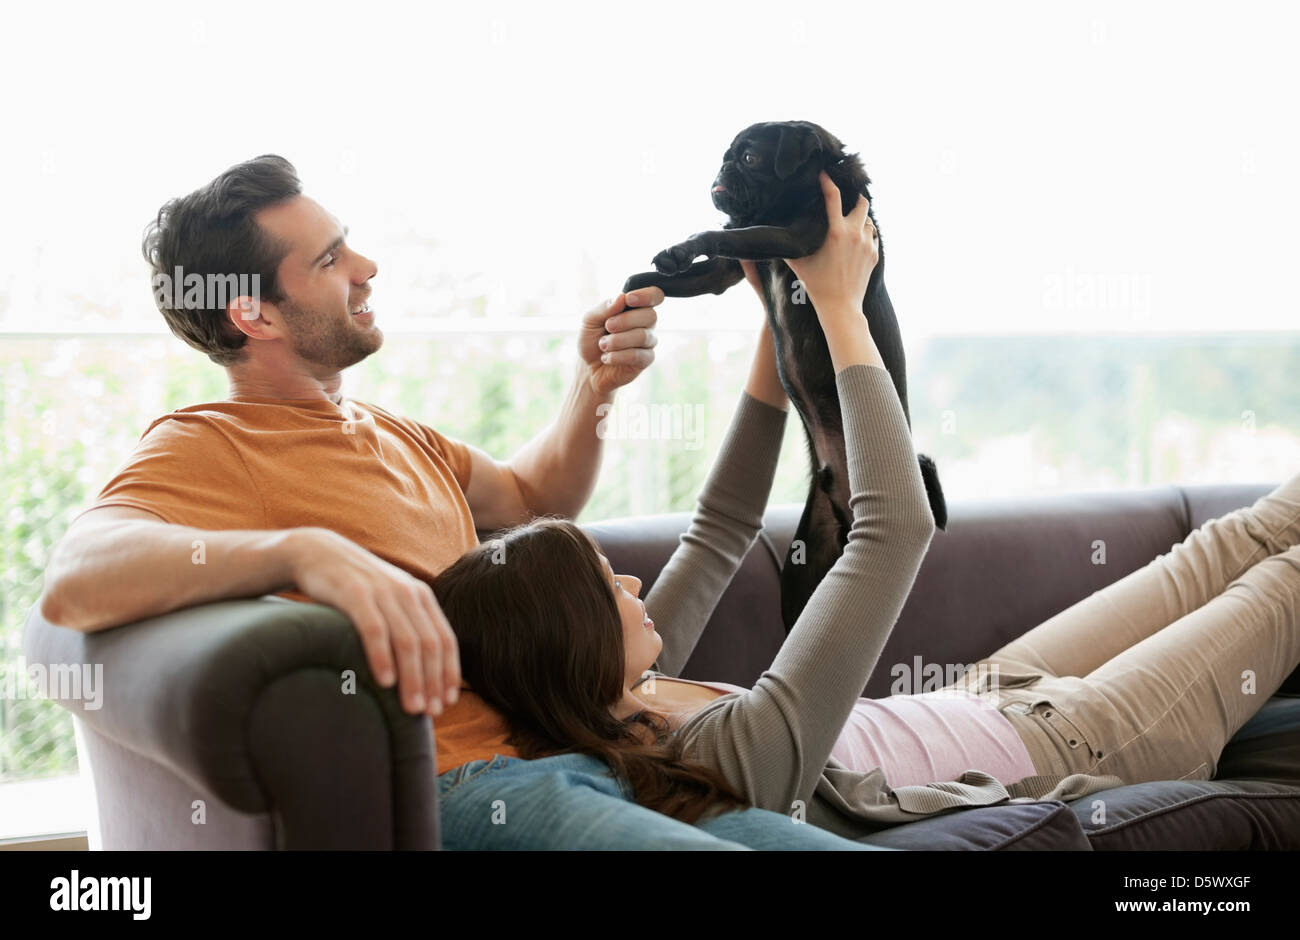 Couple relaxing with dog on sofa Stock Photo